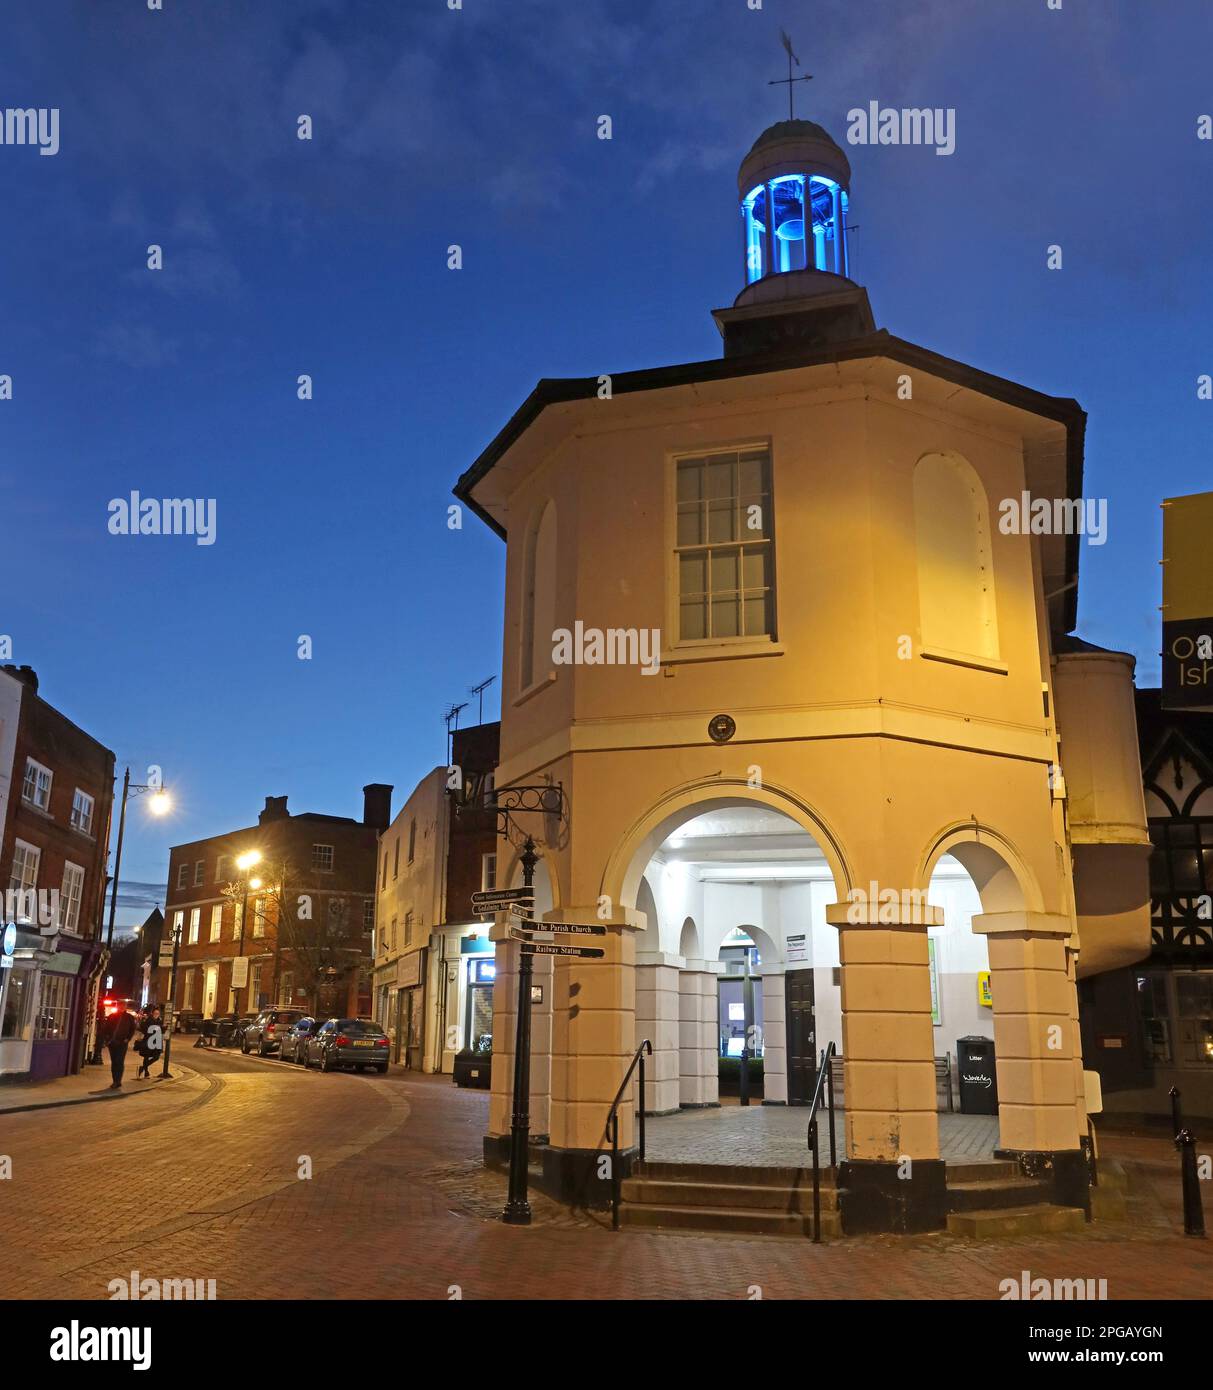 The Pepperpot, Market House, Town Hall, at dusk buildings and architecture, High St, Godalming, Waverley, Surrey, England, UK, GU7 1AB Stock Photo